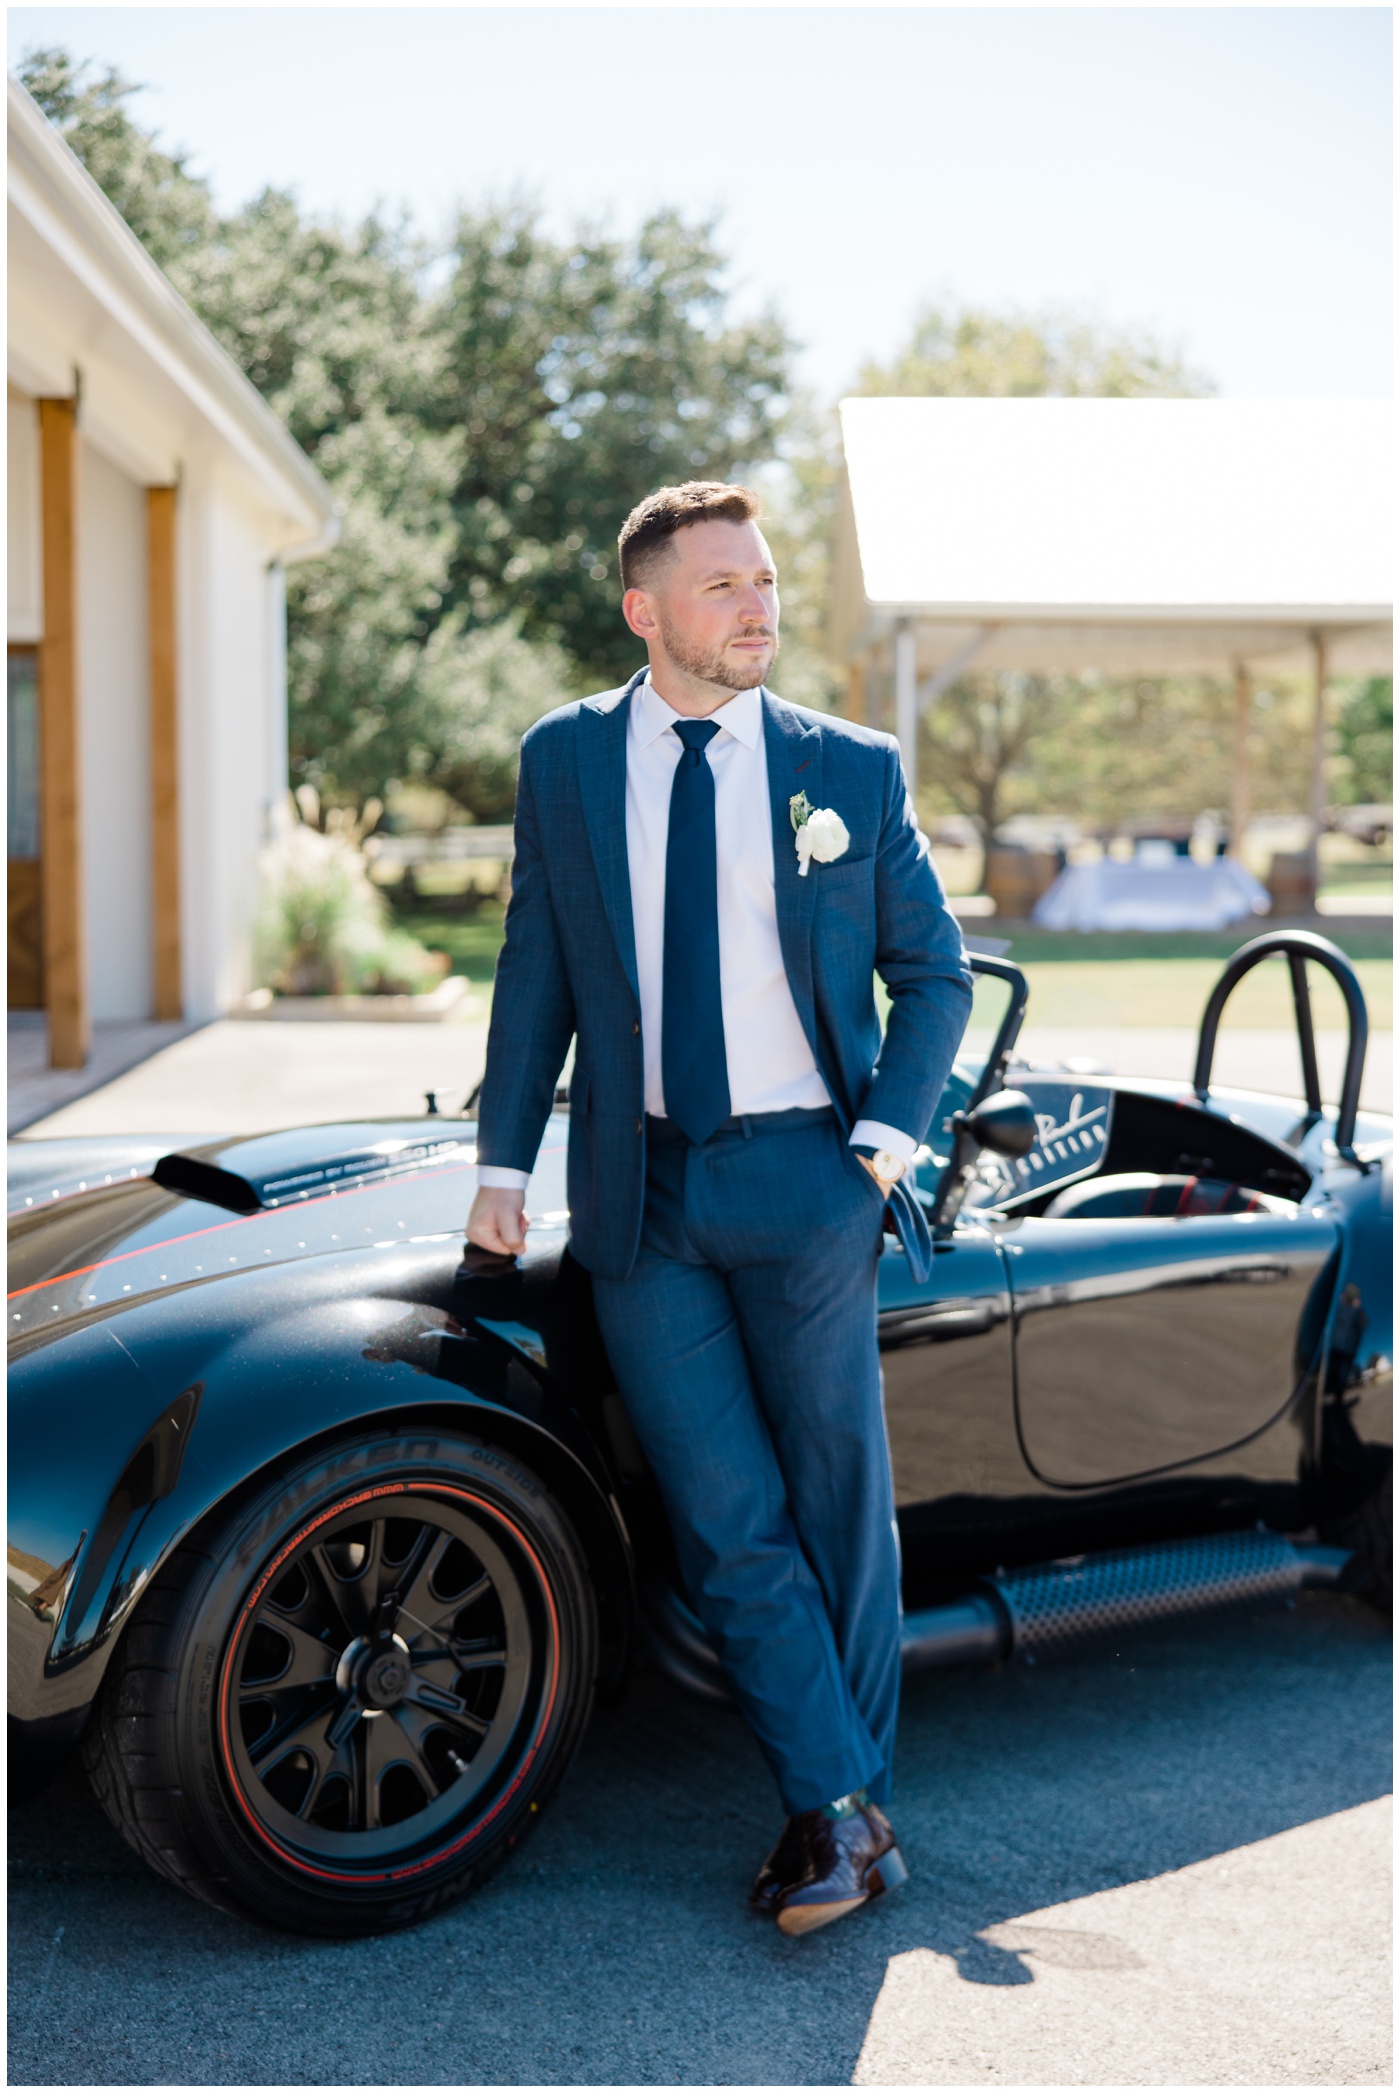 Houston Wedding Photographer | A groom stands beside a sports car on his wedding day.